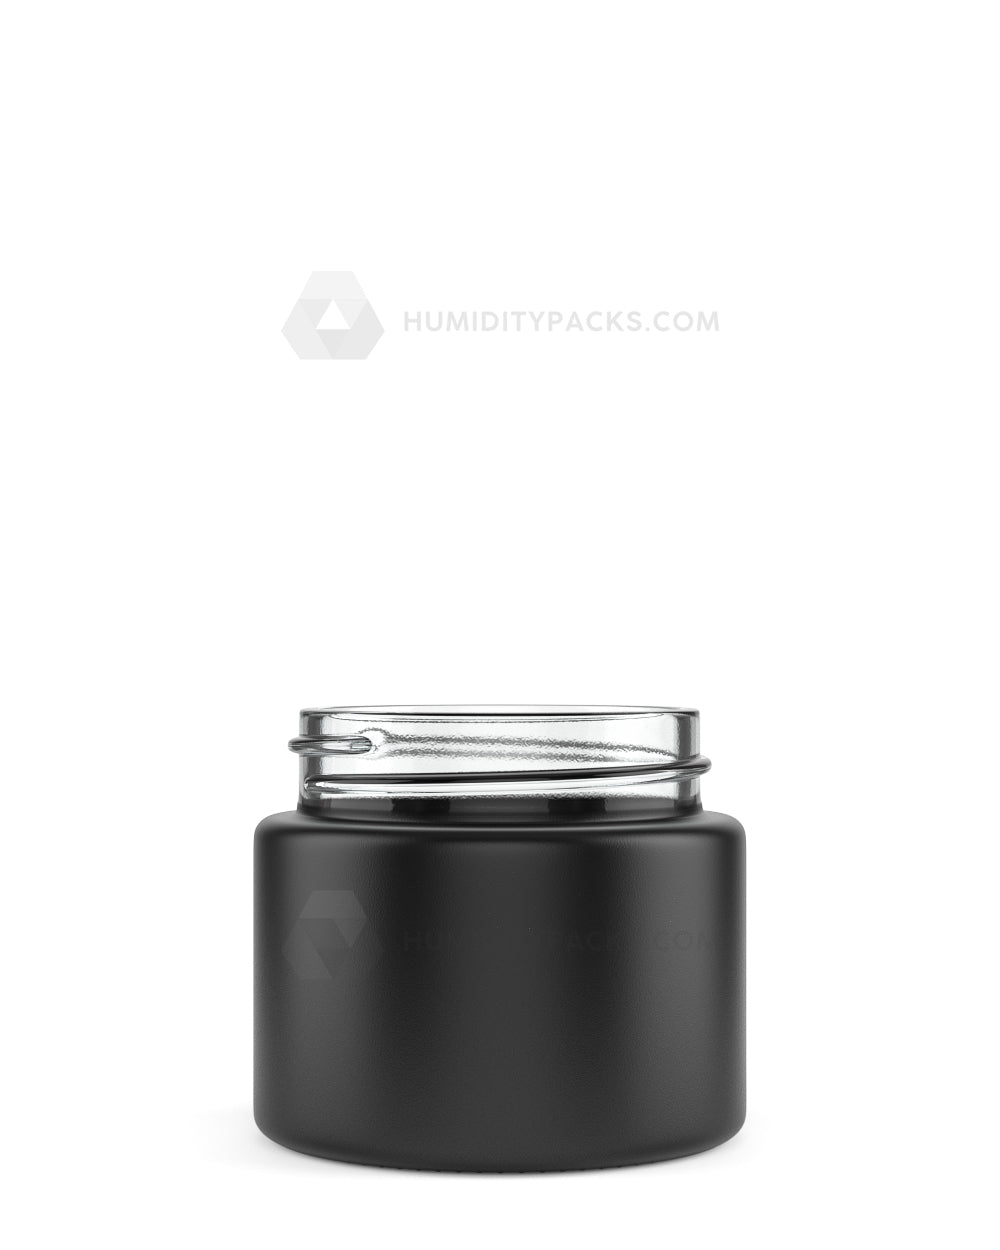 Azpack™ Glass Jar (Wide Neck) 30ml With 33/R3 Black Cap (Box Of 40)